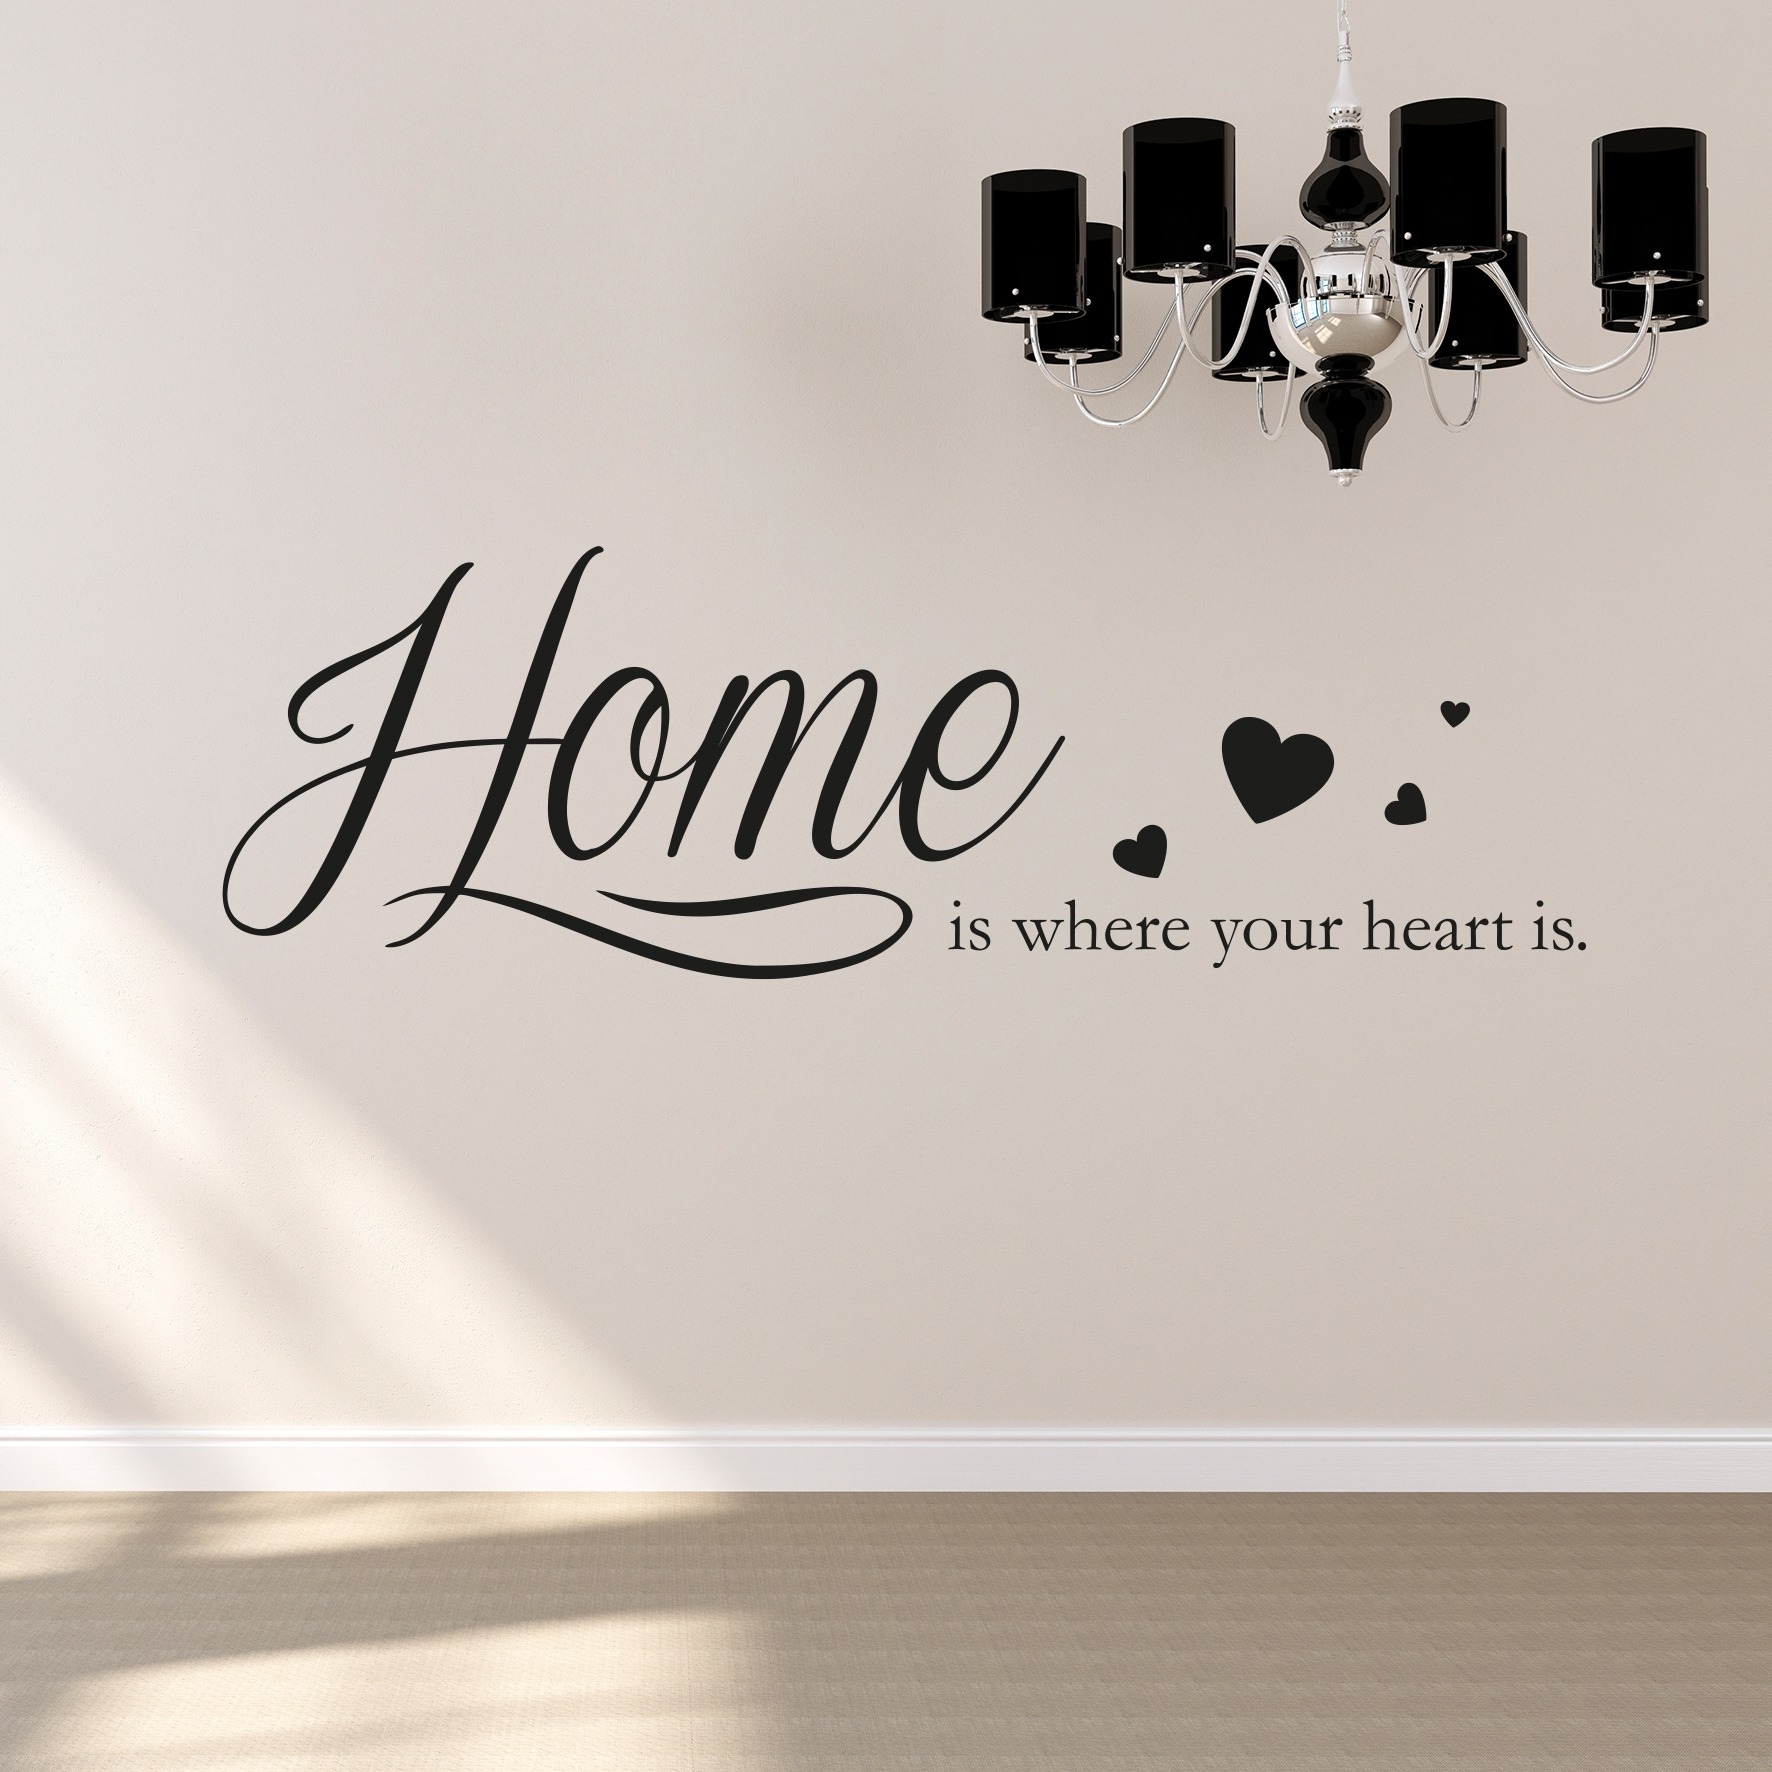 queence Wandtattoo »Home is where your heart is«, 120 x 30 cm kaufen | BAUR